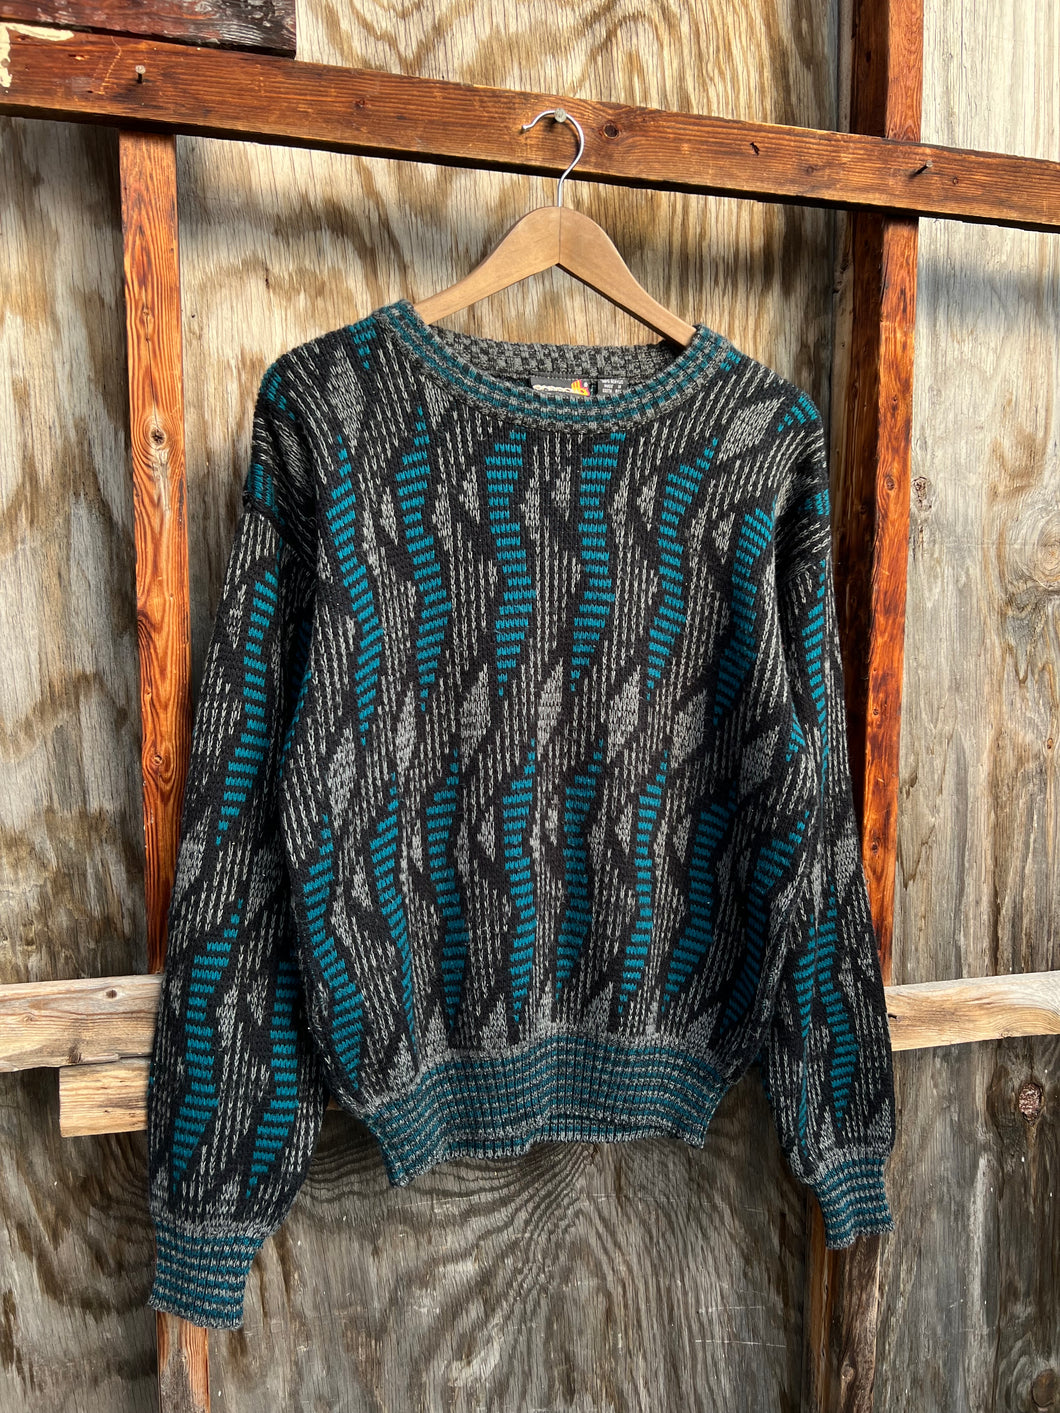 Vintage 80s Blue and Black Pattern Sweater (S)